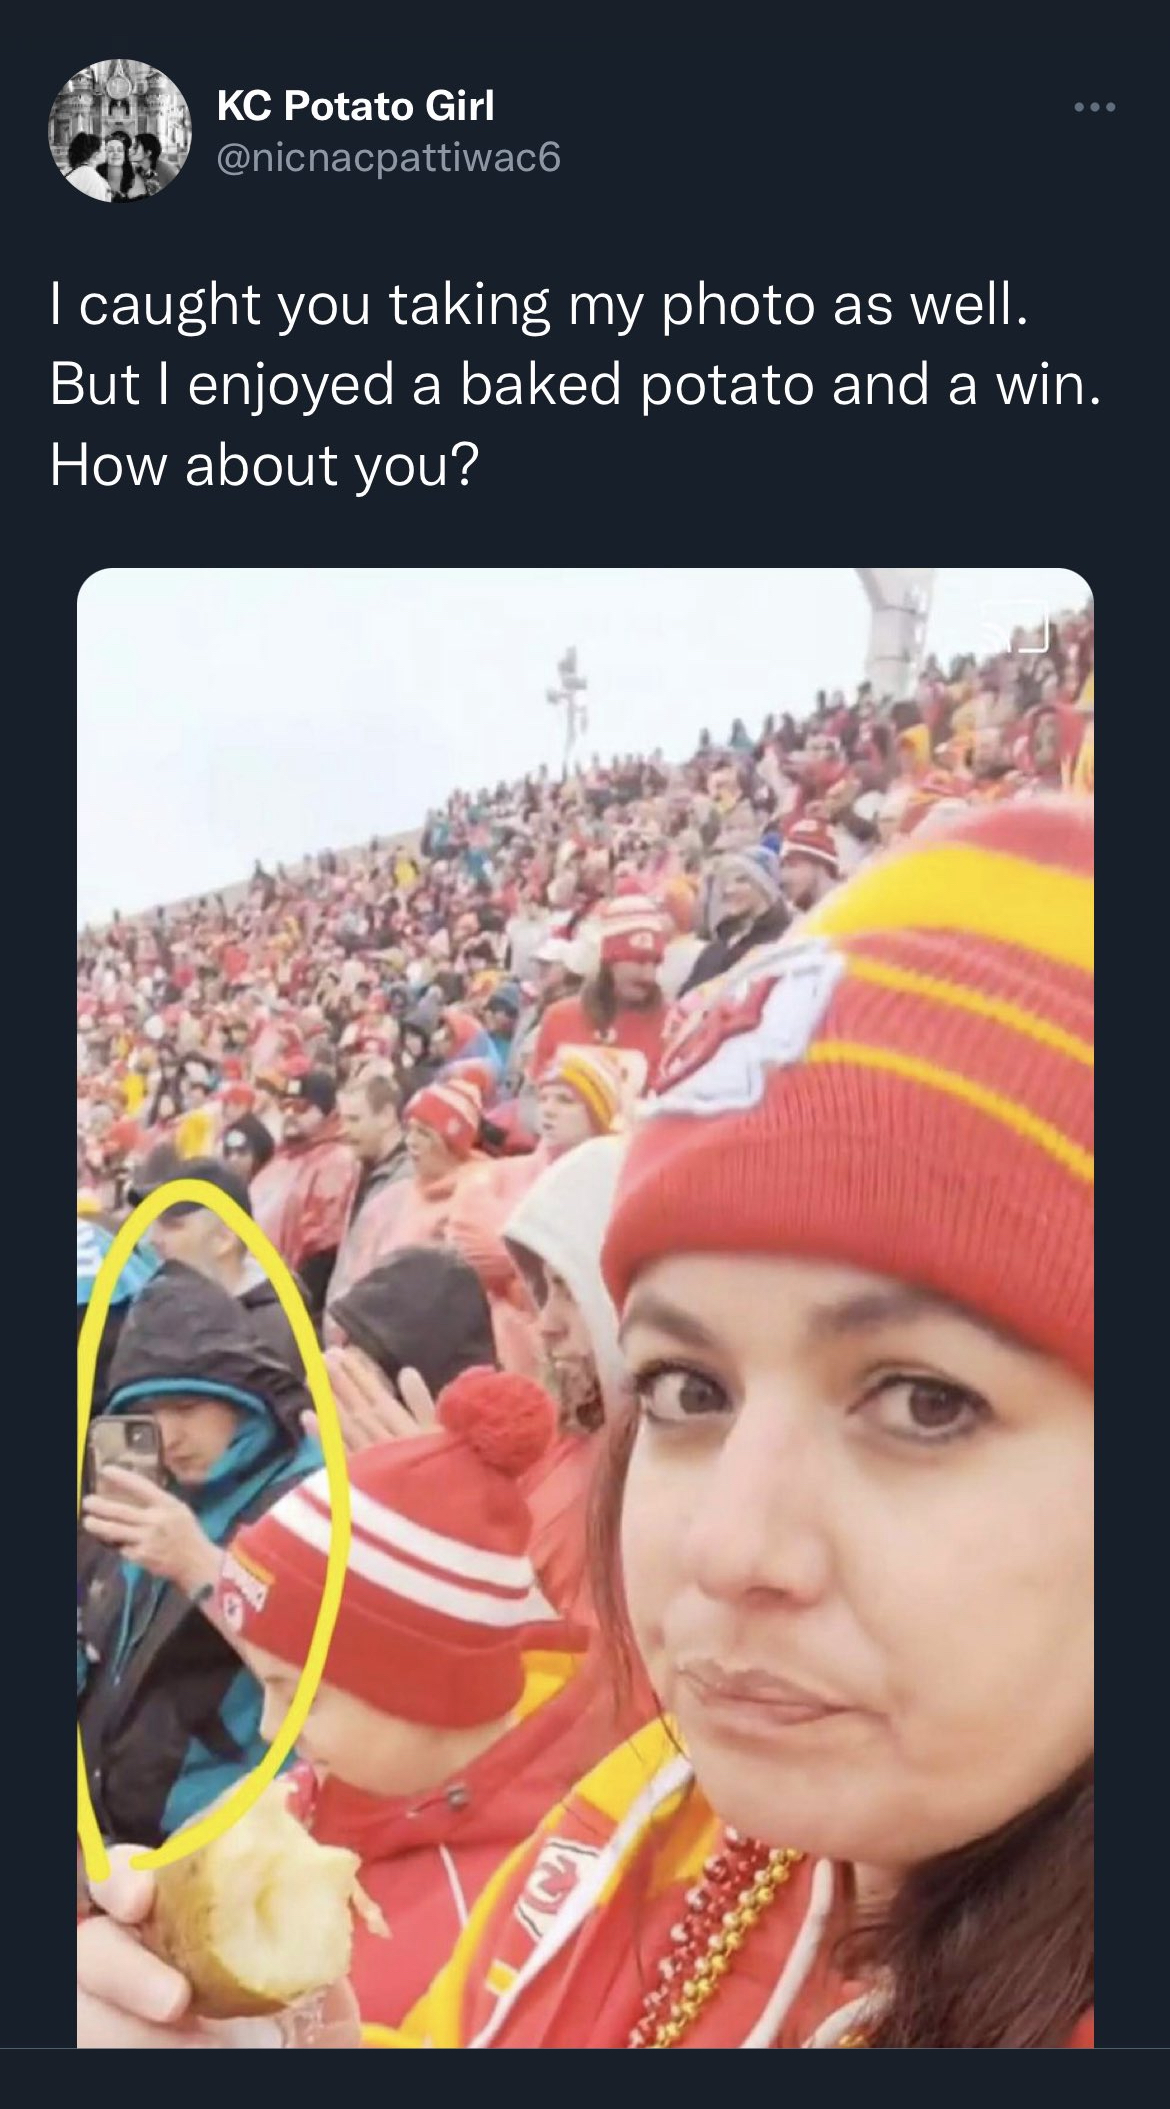 tweets dunking on celebs - poster - Kc Potato Girl I caught you taking my photo as well. But I enjoyed a baked potato and a win. How about you? wwwsssss